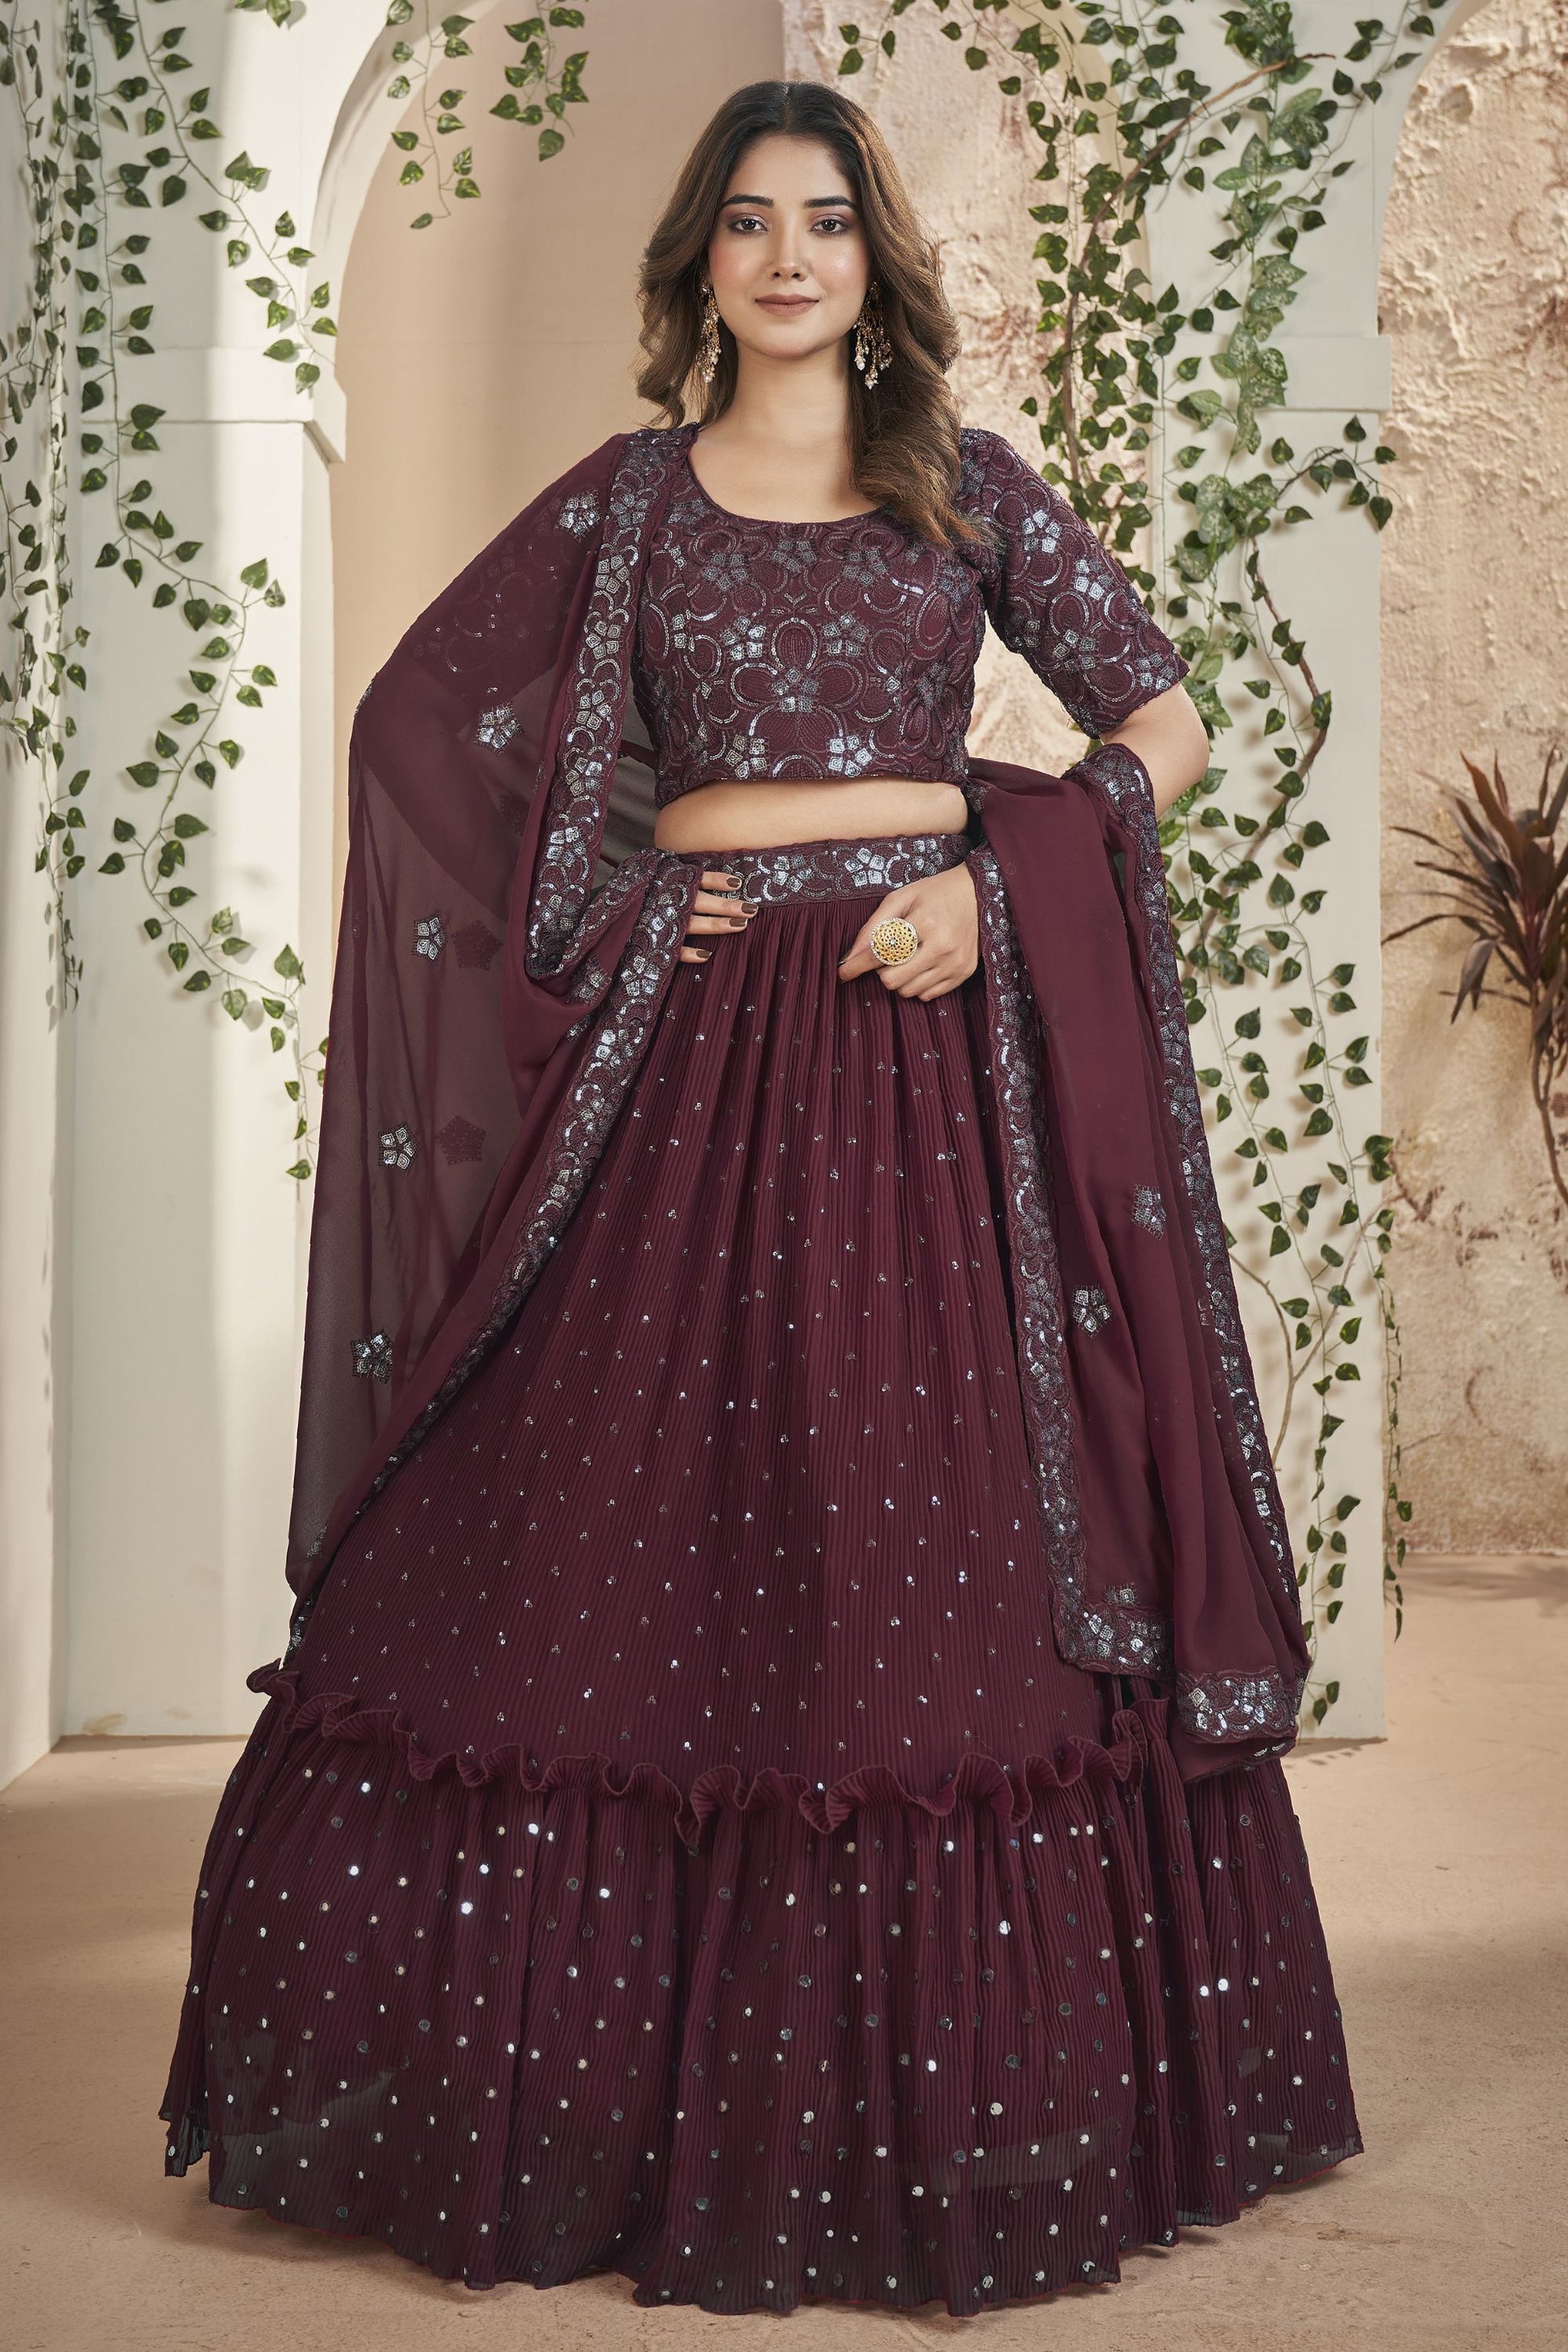 Maroon Georgette Ruffle Lehenga Choli 9 Meter Flair For Indian Festivals & Weddings - Sequence Embroidery Work, Thread Embroidery Work,